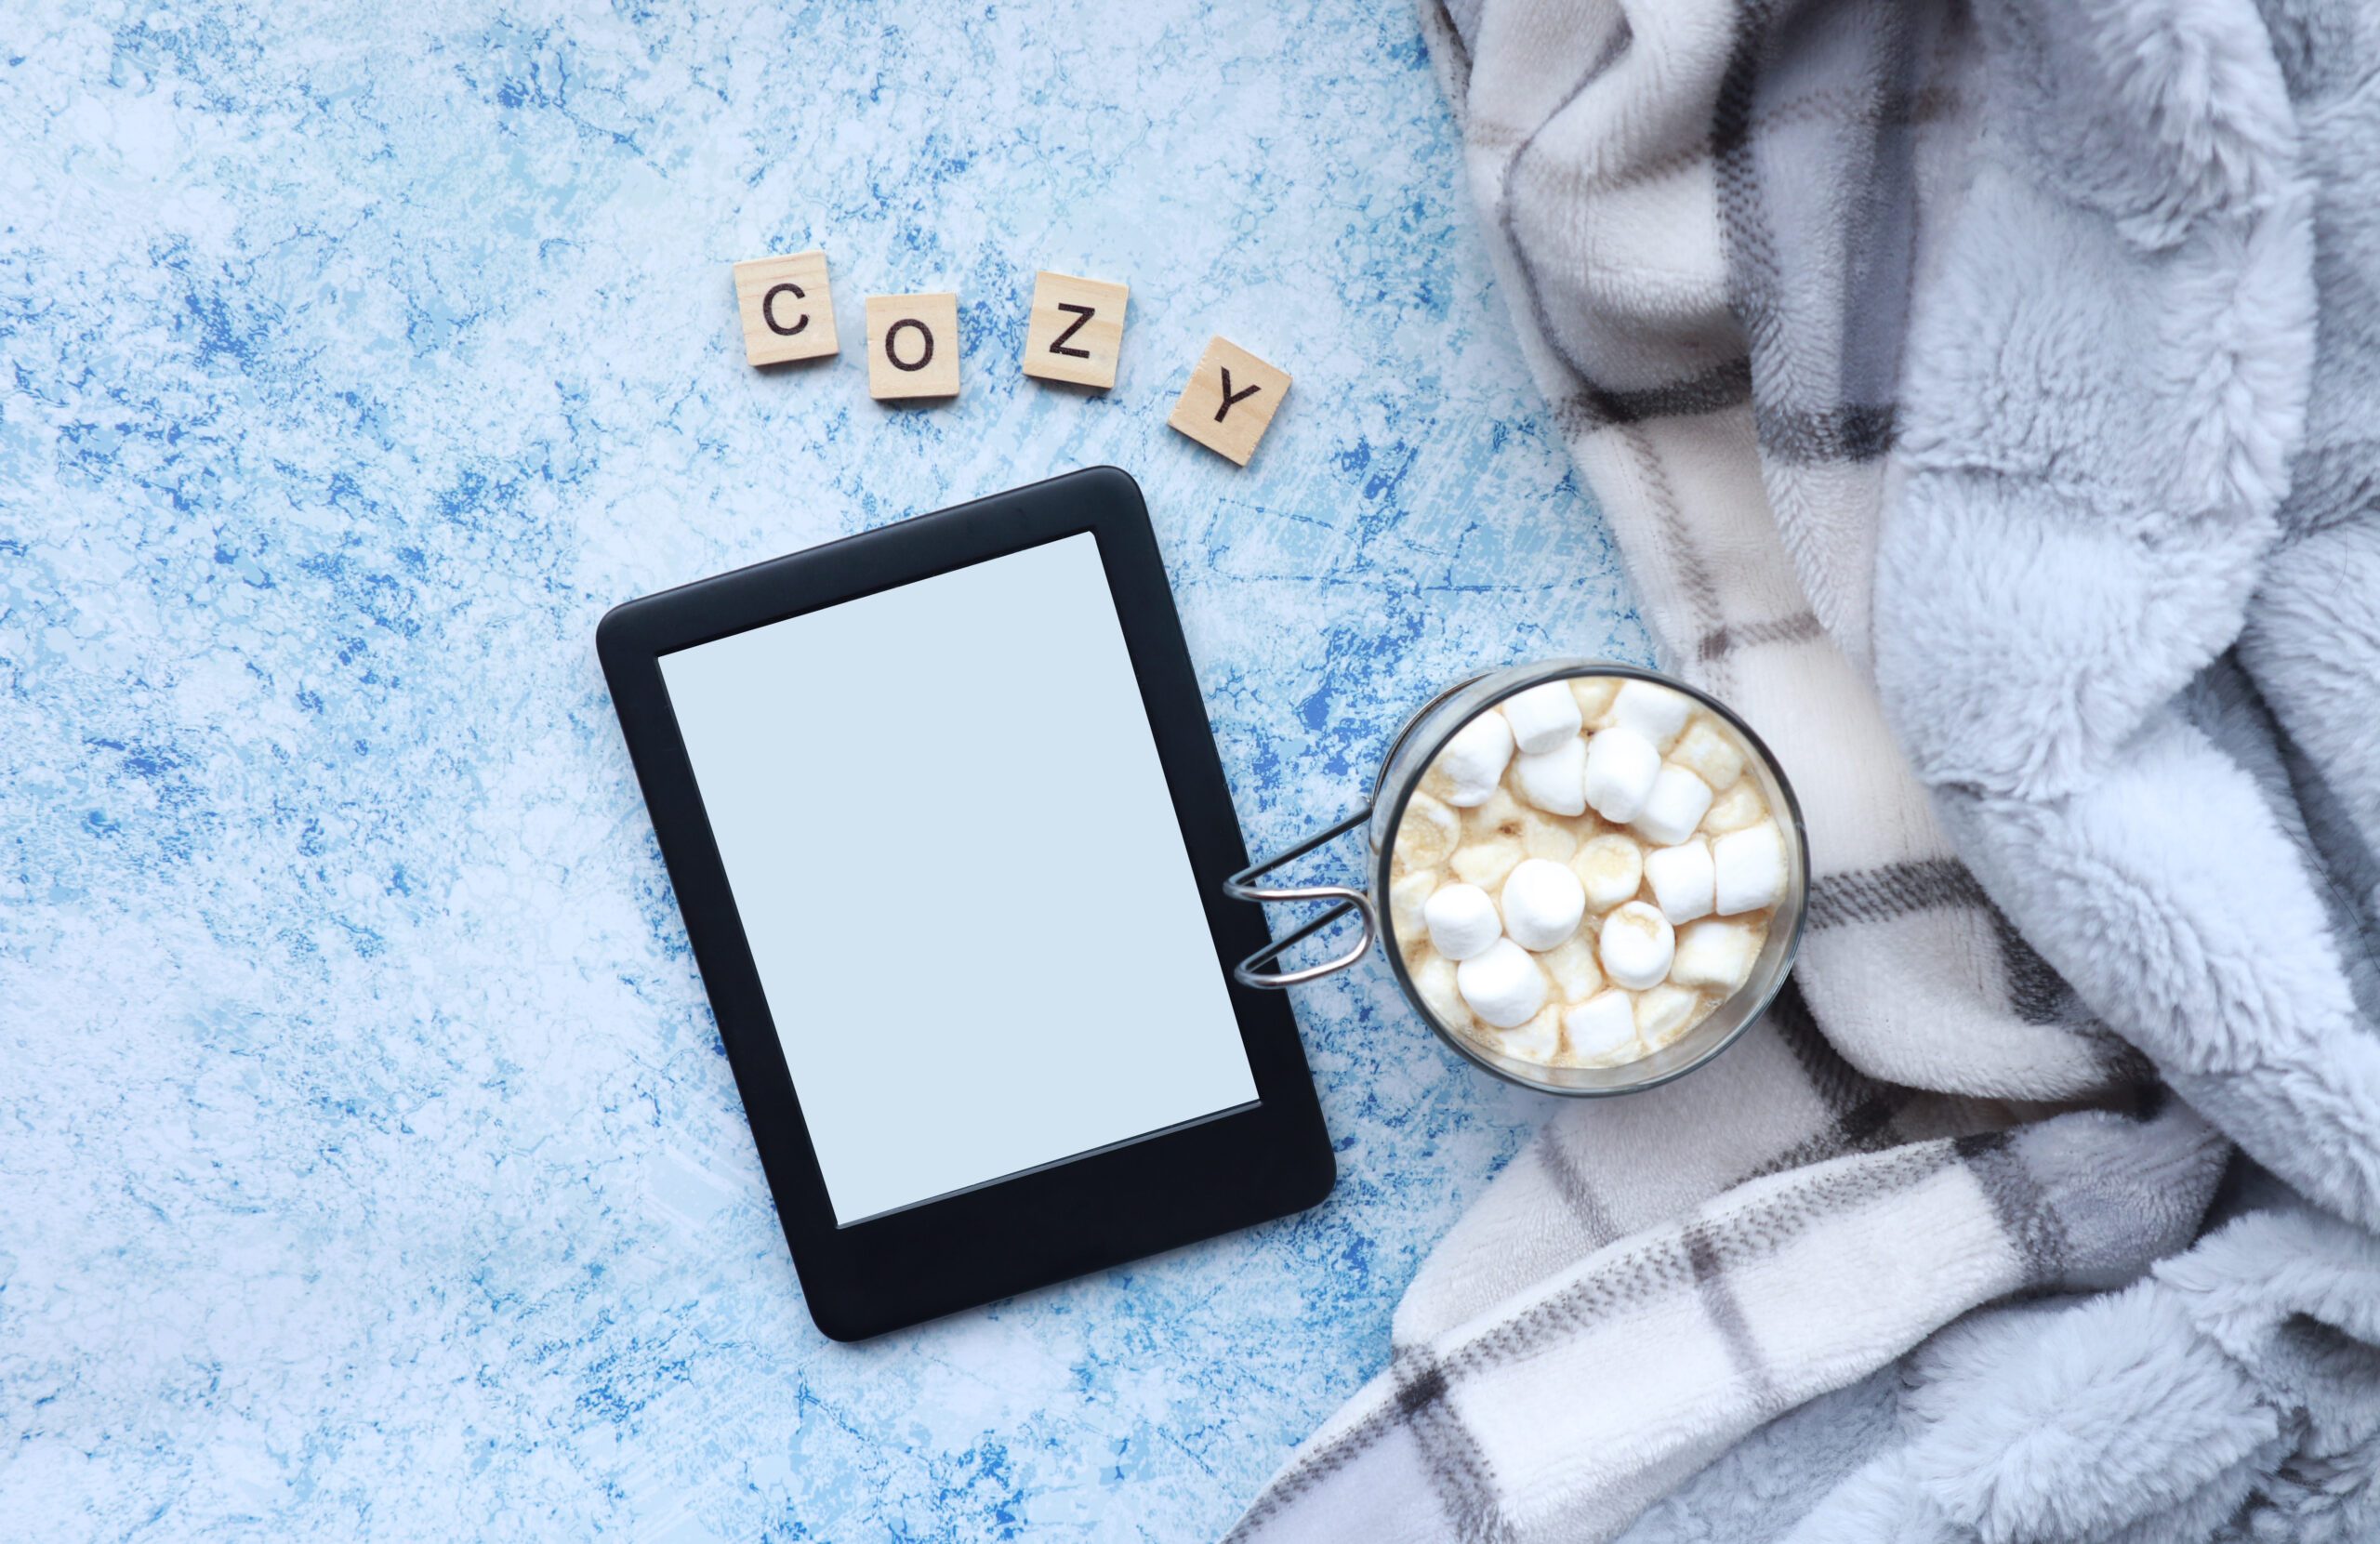 Cozy blanket, hot chocolate and eBook reader